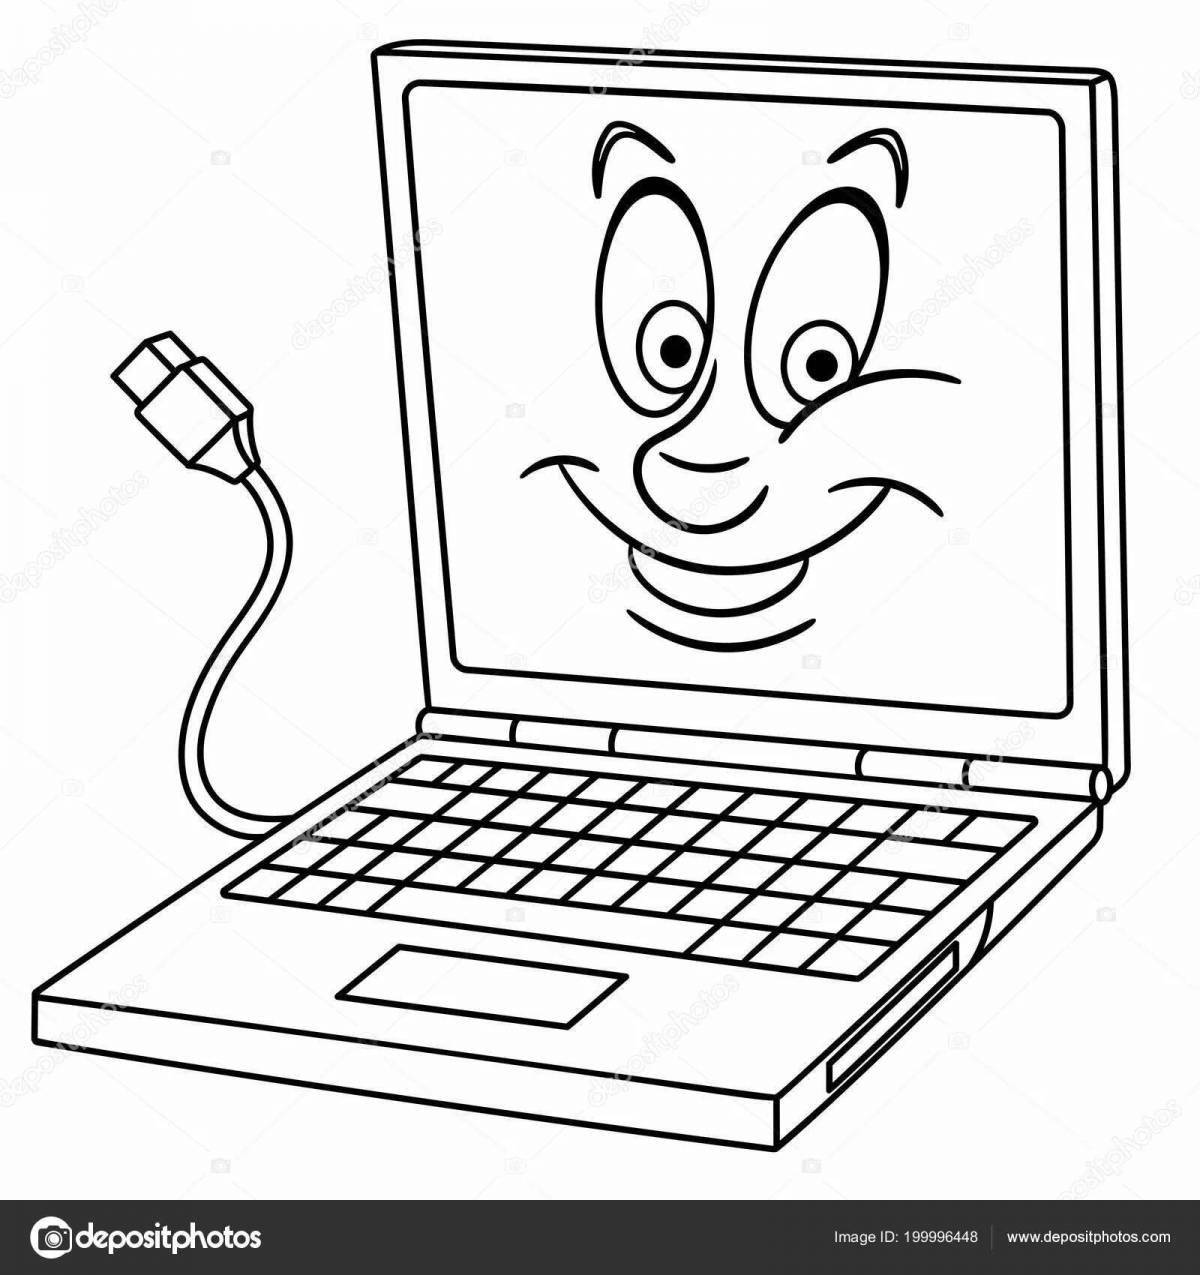 Bright computer and phone coloring page